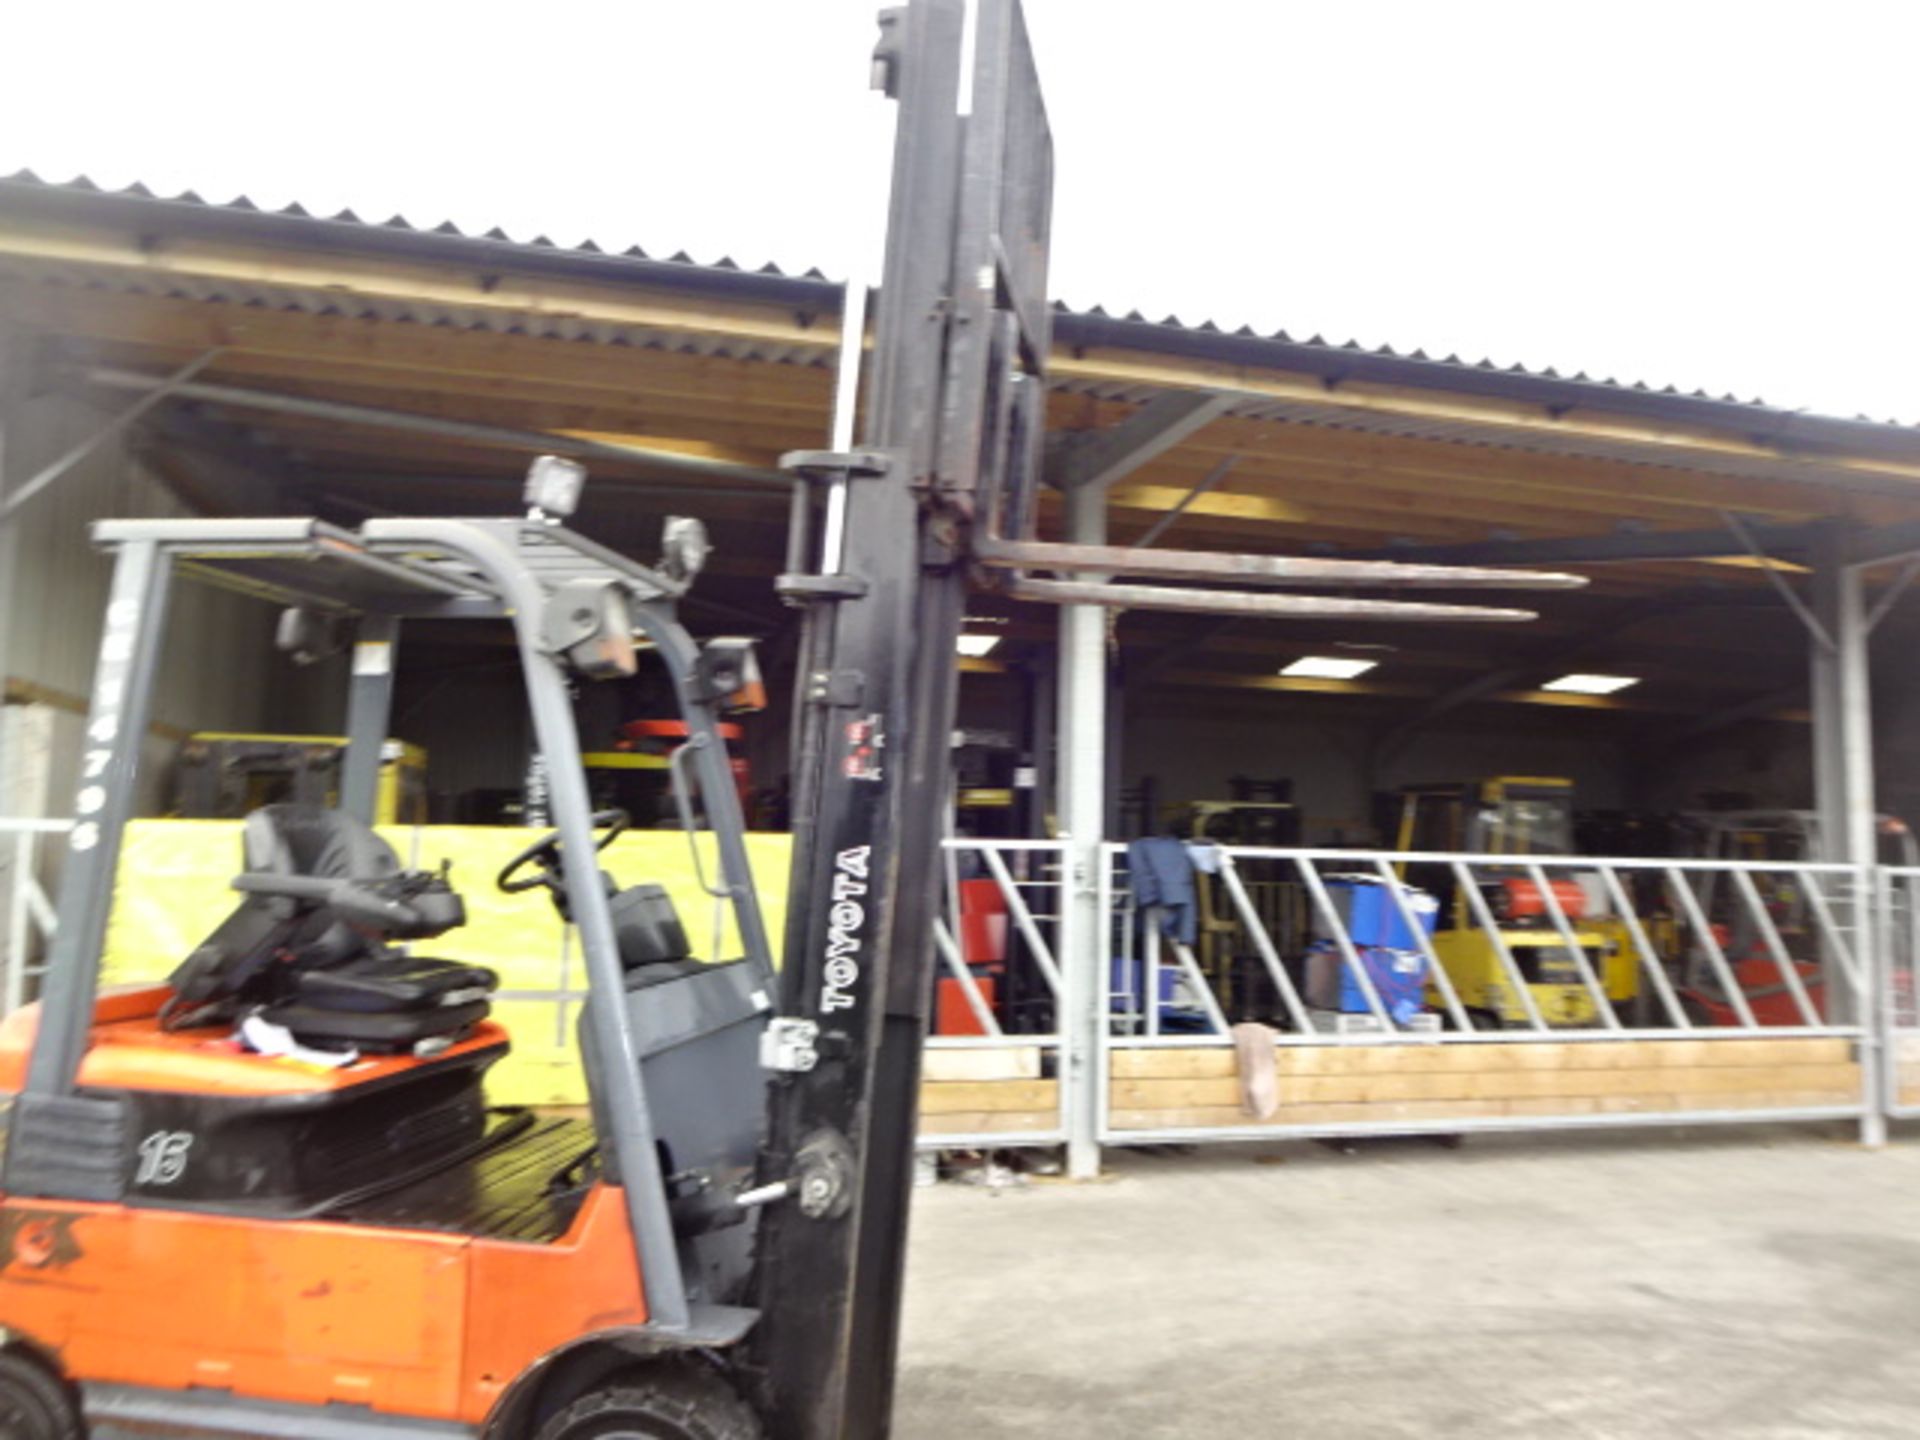 2009 TOYOTA 7FBMF16 1.6t battery driven forklift truck S/n: E14607 with duplex mast & side-shift ( - Image 4 of 7